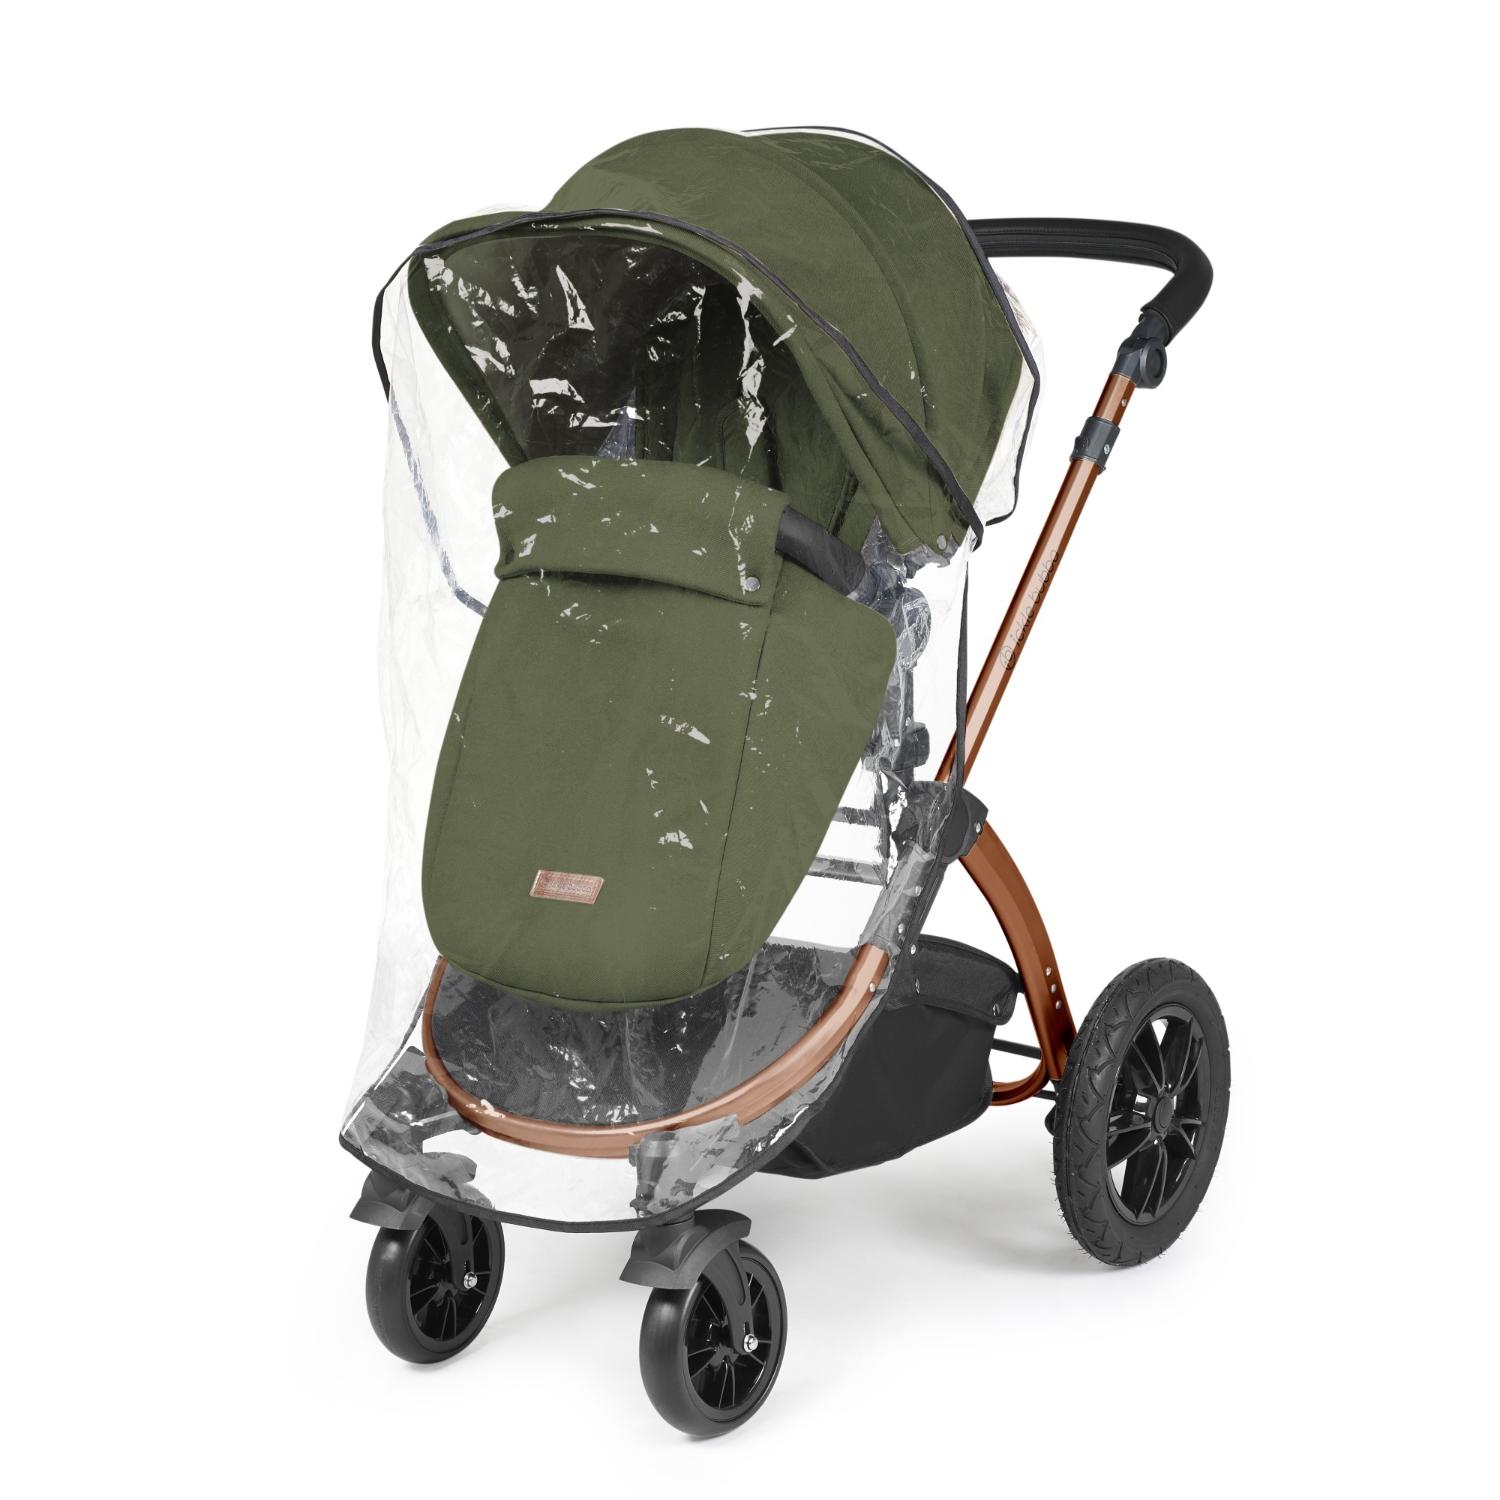 Rain cover placed on an Ickle Bubba Stomp Luxe Pushchair in Woodland green colour with bronze chassis